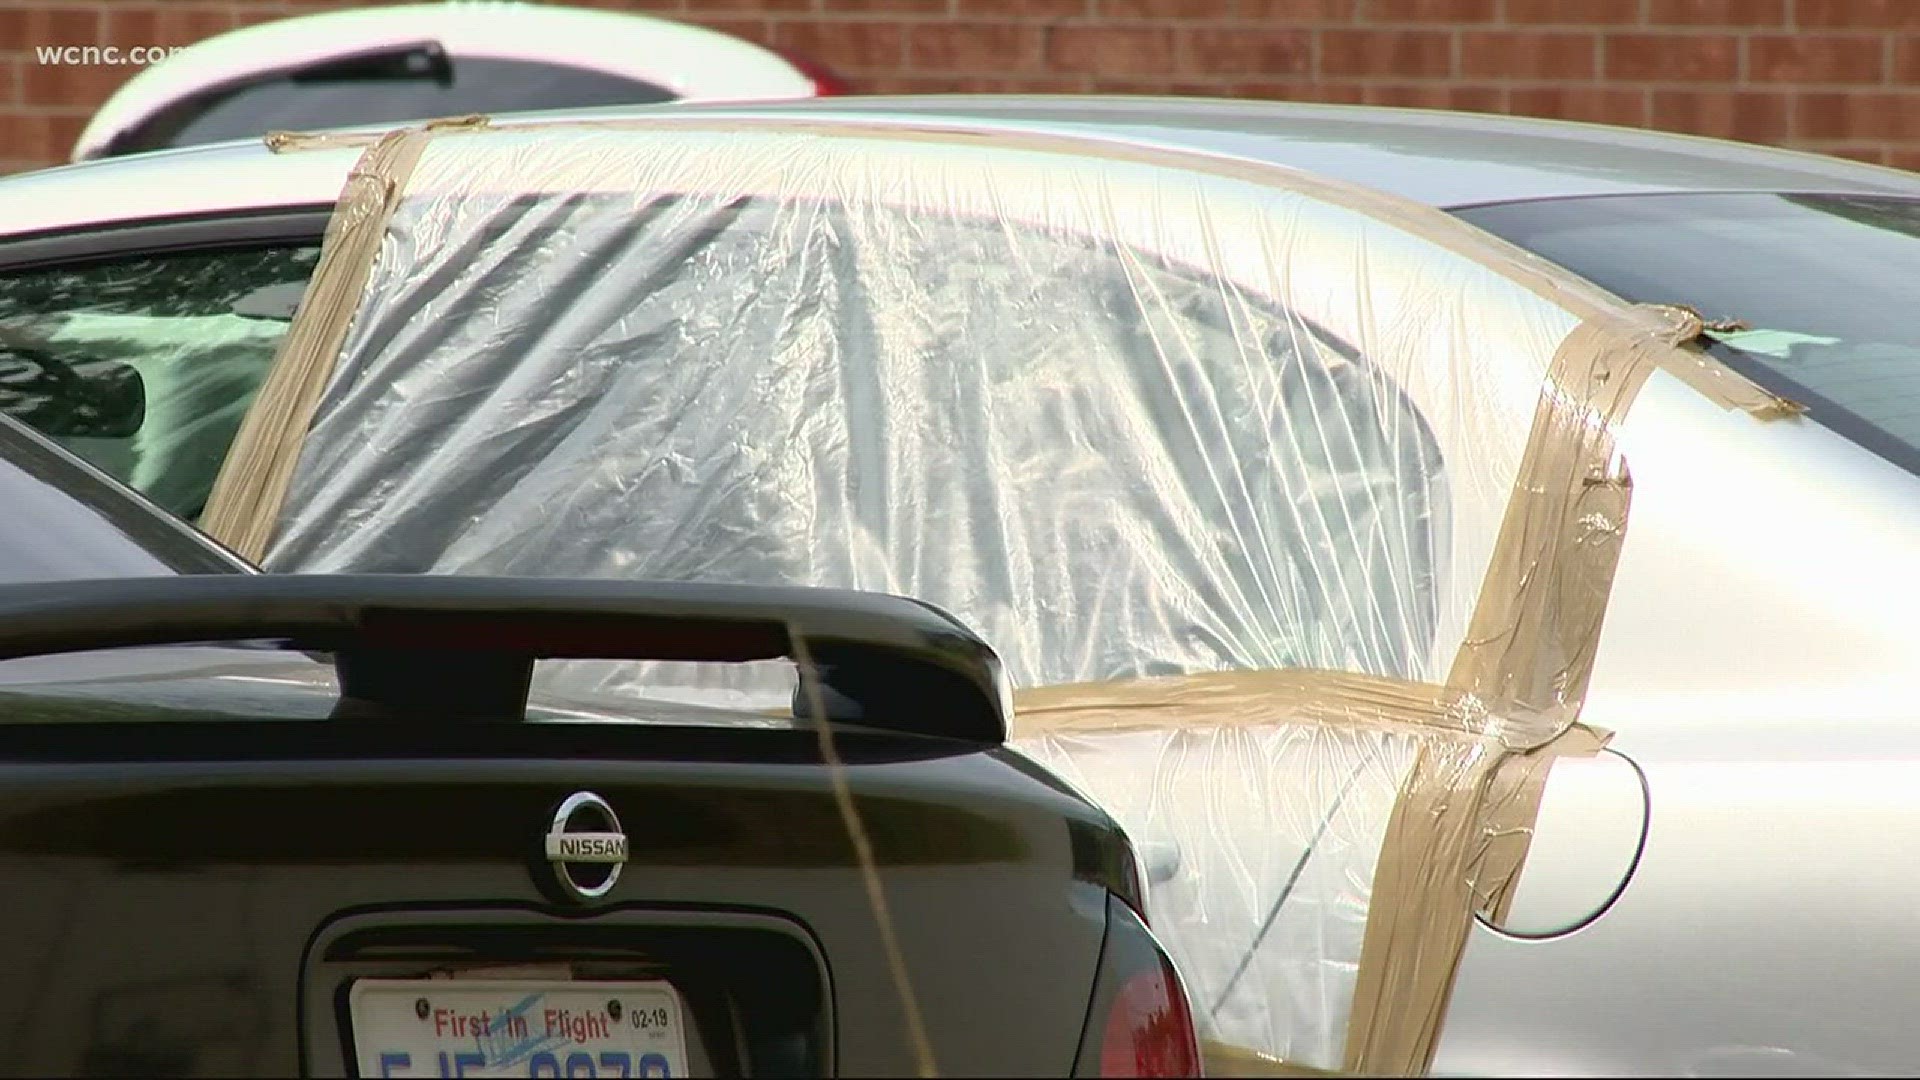 Several cars in Charlotte were targeted for break-ins police say, even though some of them were locked.